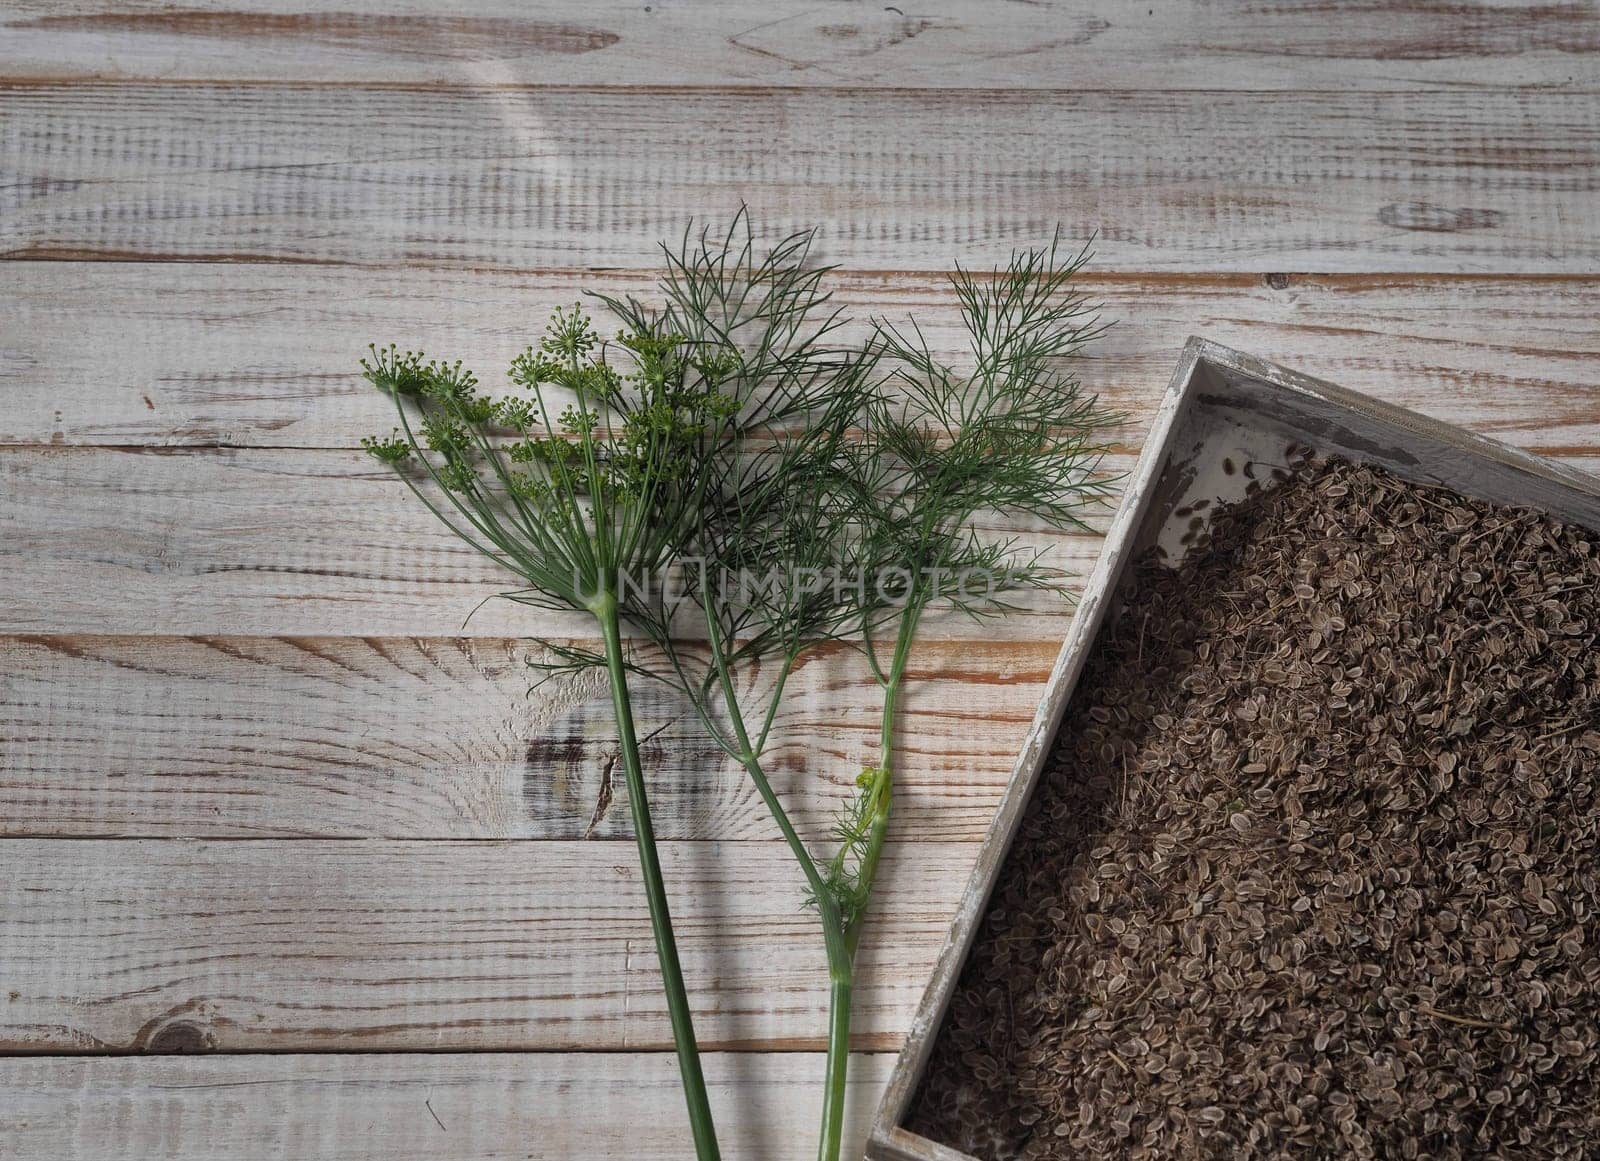 Background with a box of raw organic dill seeds with a green sprig of dill on a wooden table. Plant, food and medical themes. by TatianaPink